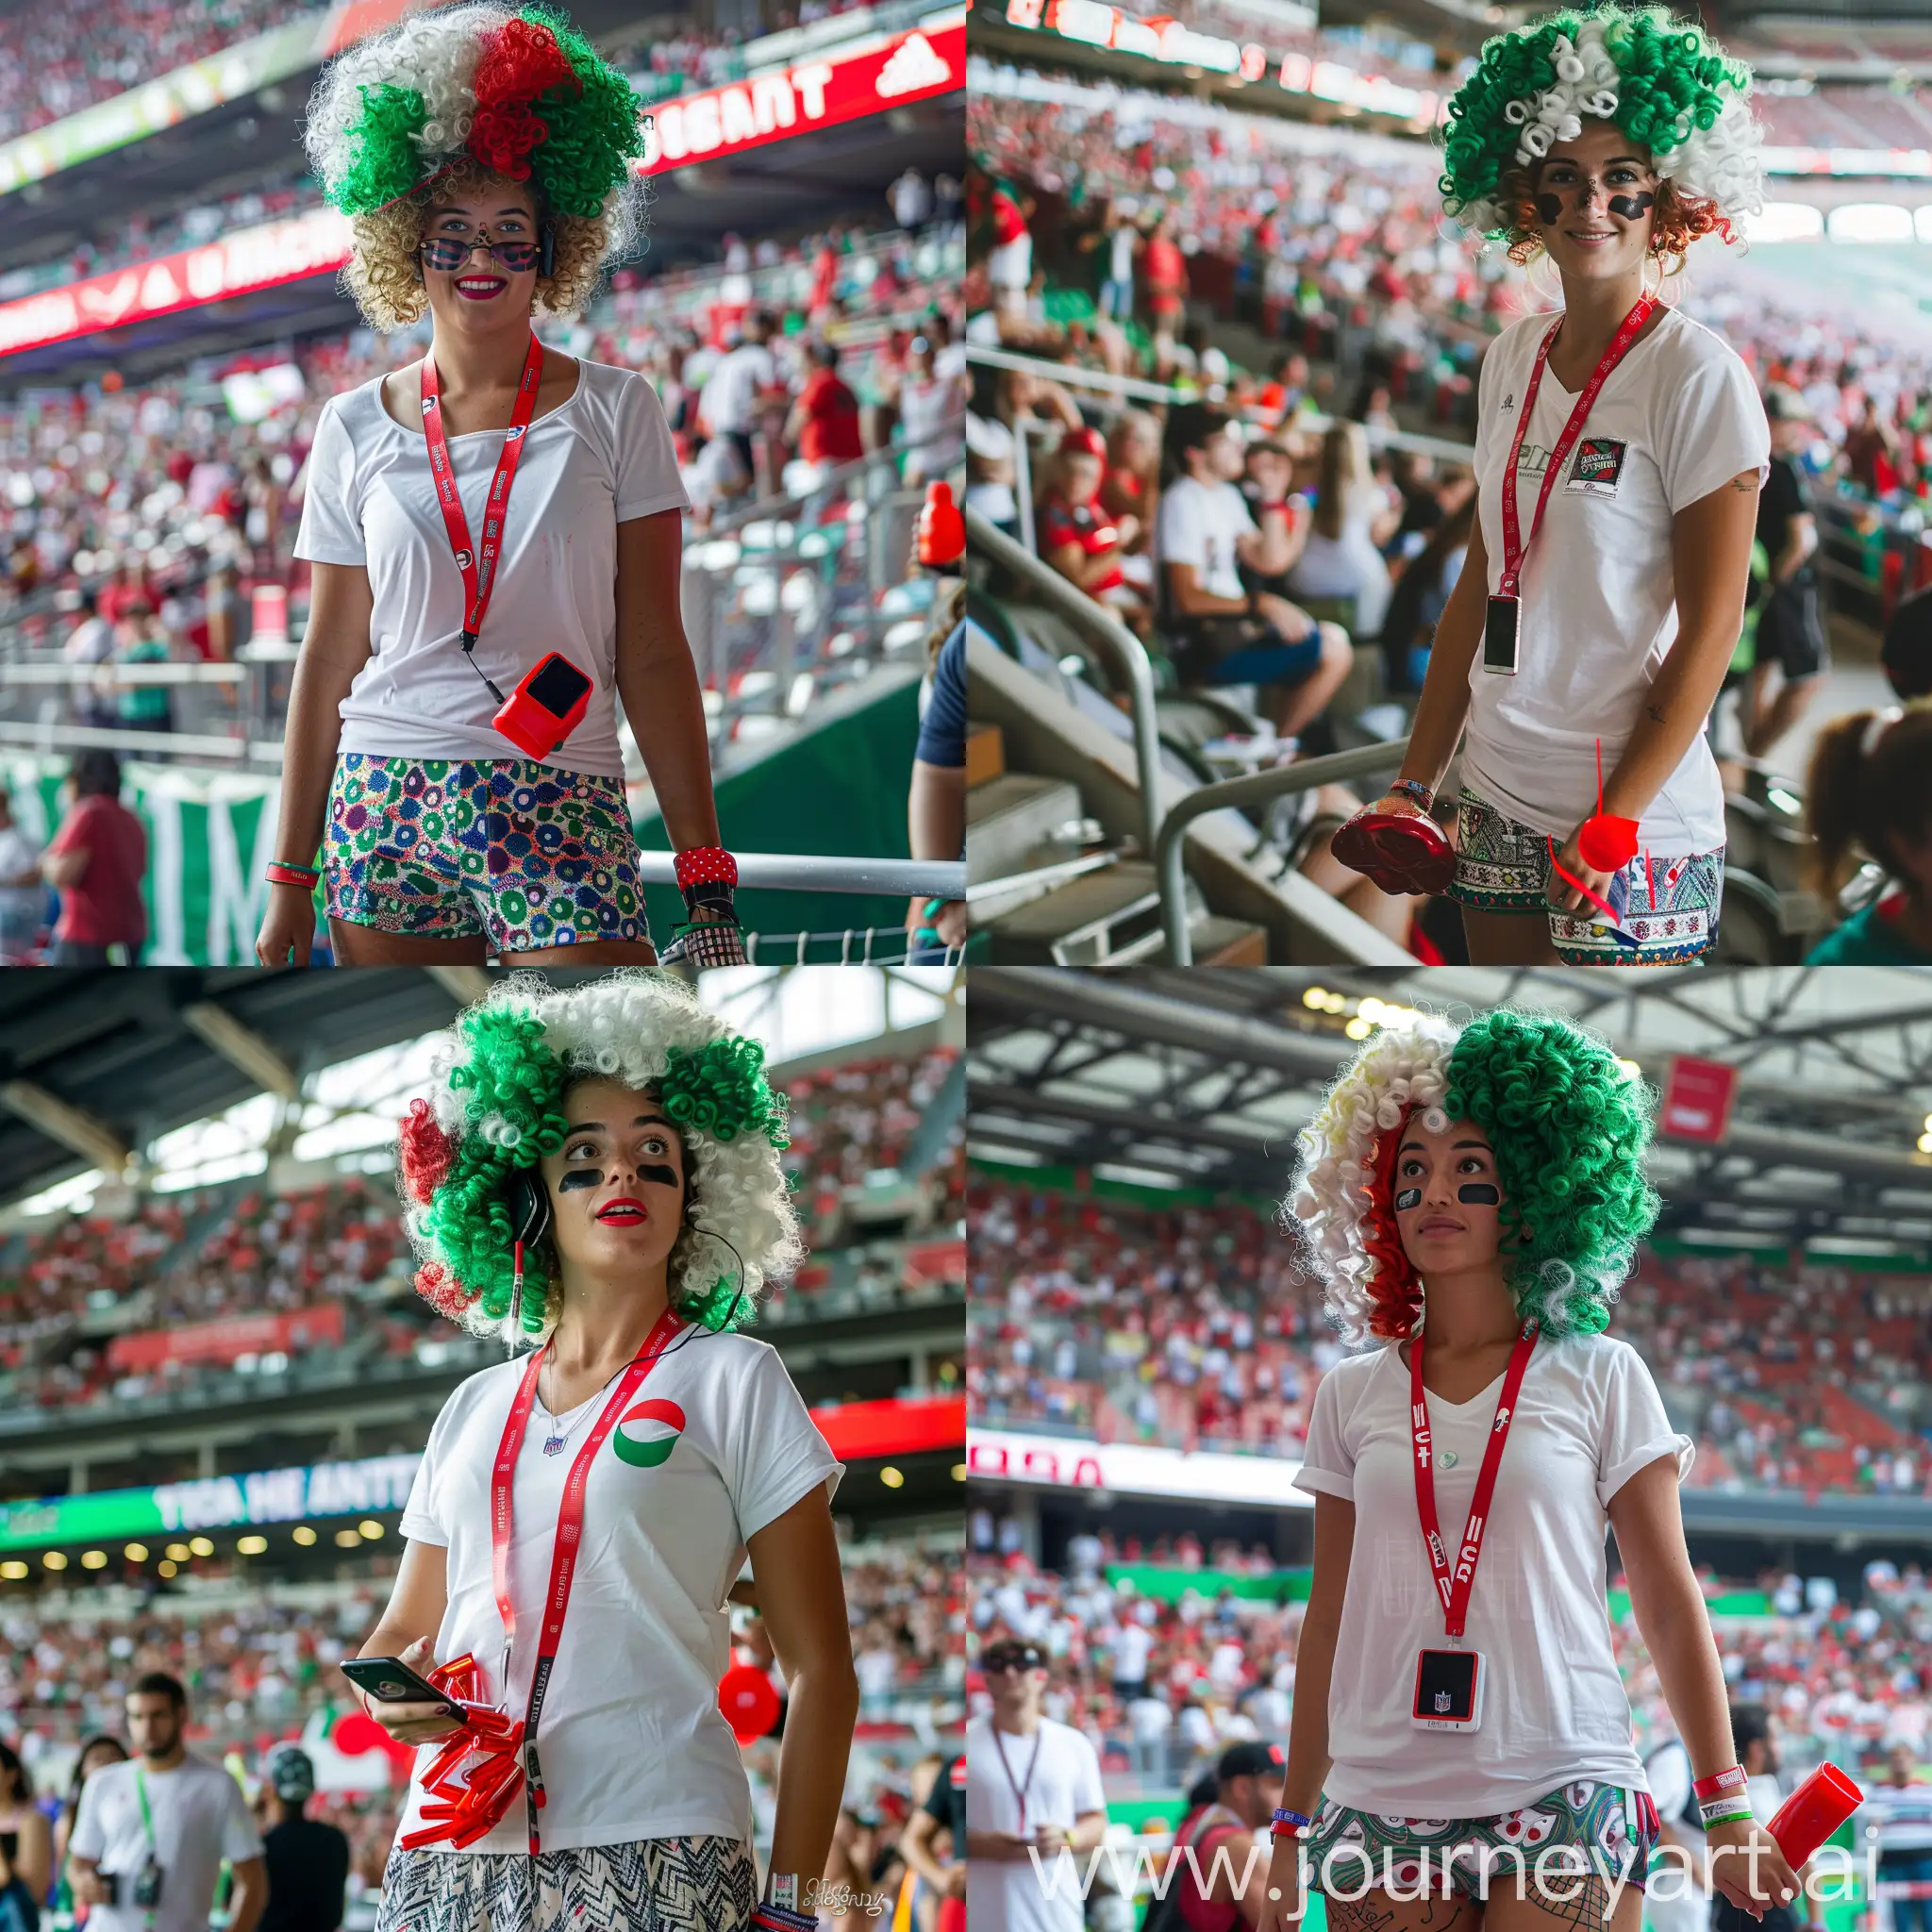 A female football fan wearing a curly wig in three colors: green, white, and red, standing in the stands of a football stadium. The fan is dressed in a white T-shirt and patterned shorts. Around her neck is a red phone lanyard with a phone attached. She is holding a red noise maker in her right hand. The stands are filled with excited spectators, creating a vibrant and lively atmosphere. --ar 4:7

